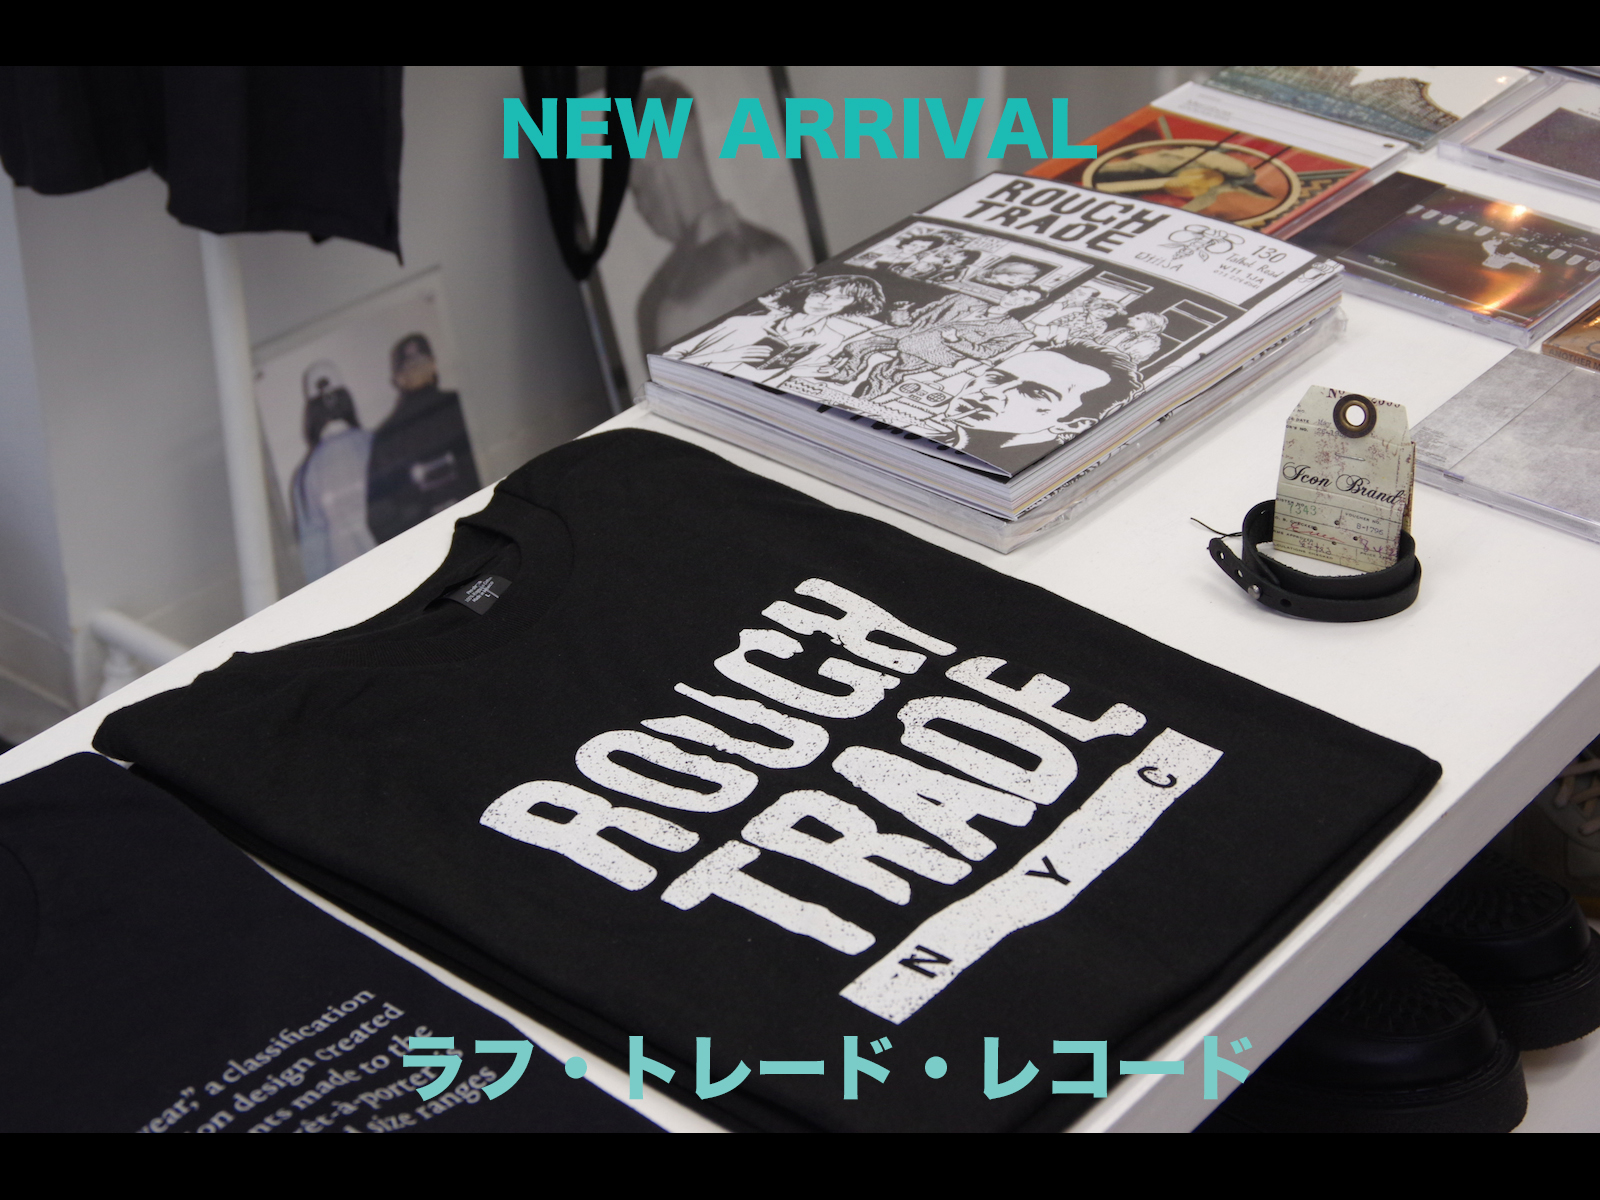 NEW ARRIVAL: ROUGH TRADE LIMITED ITEM